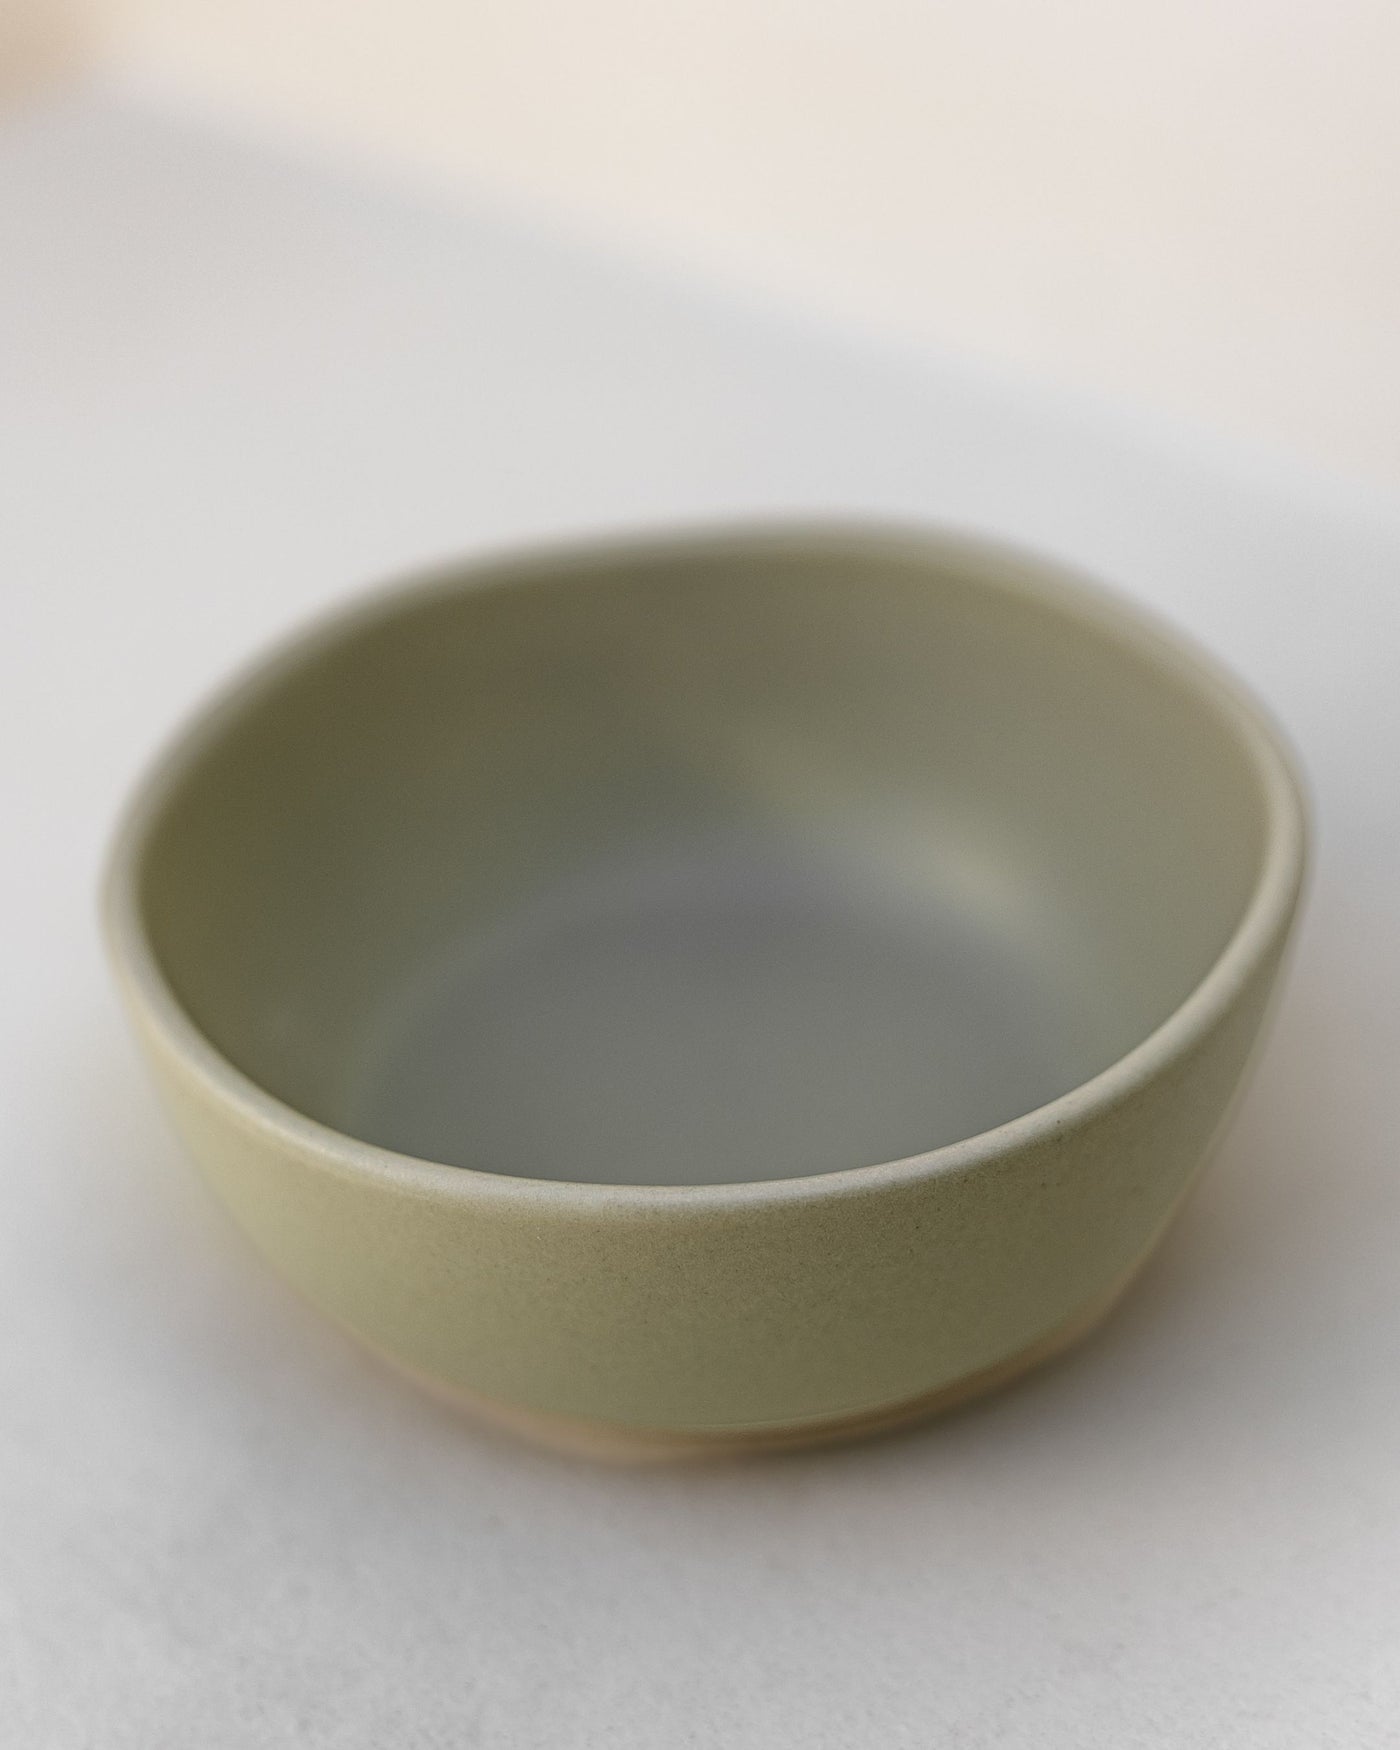 Little Foodie Bowl in Olive Product Image